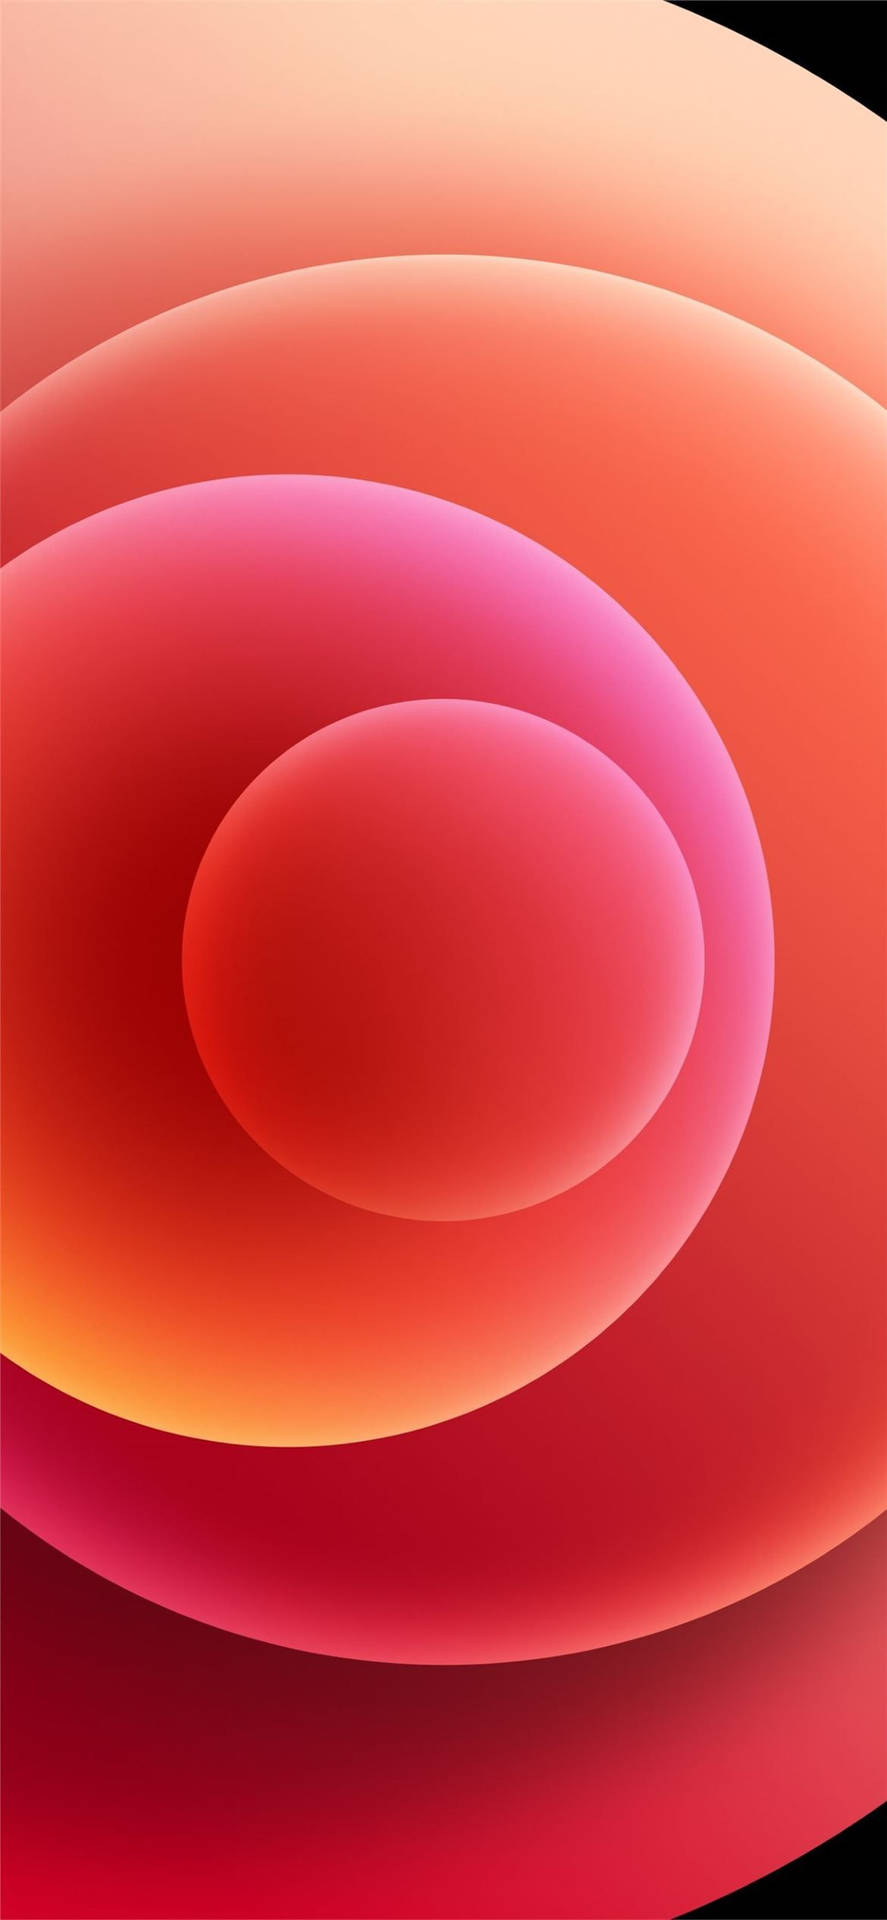 Iphone 12 Stock Peach Color Circles Background